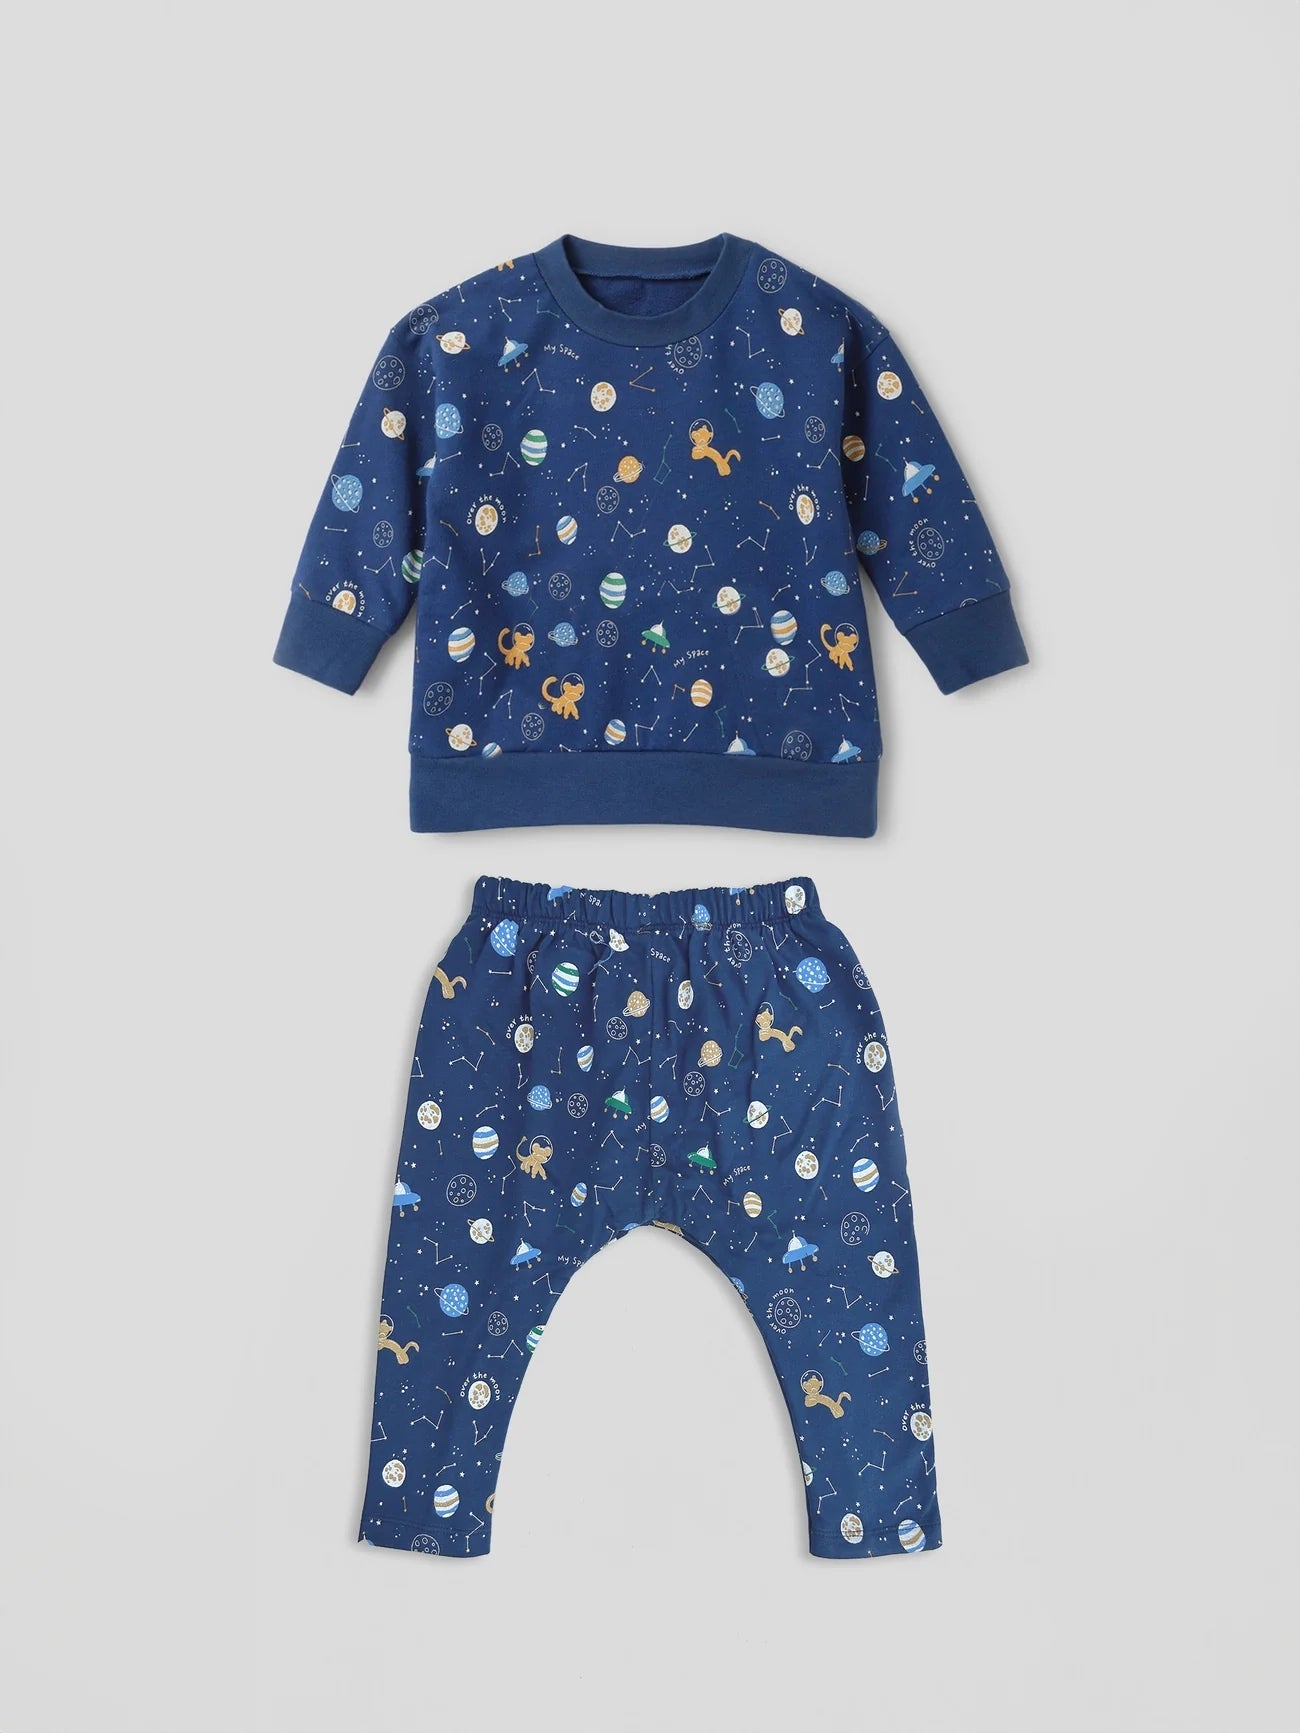 Galactic Comfort: Outer Space Sweat & Pants Set for Cosmic Style